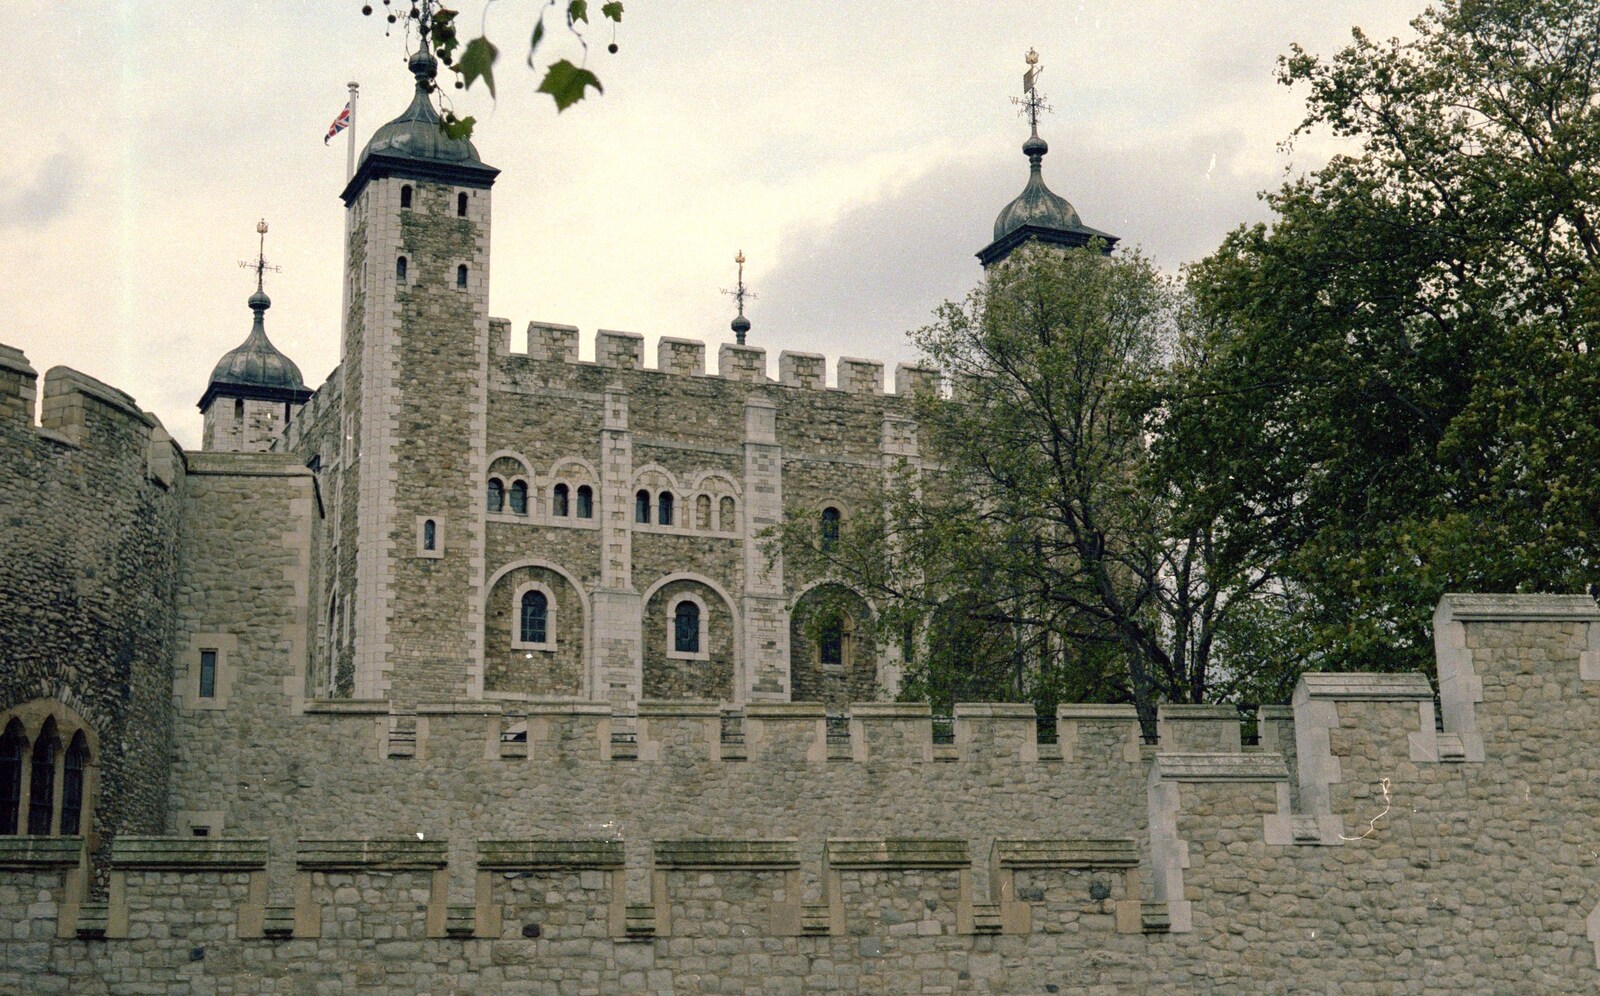 The Tower of London from Grape Picking and the Trip Back to Poly, Bransgore and London - 20th September 1986